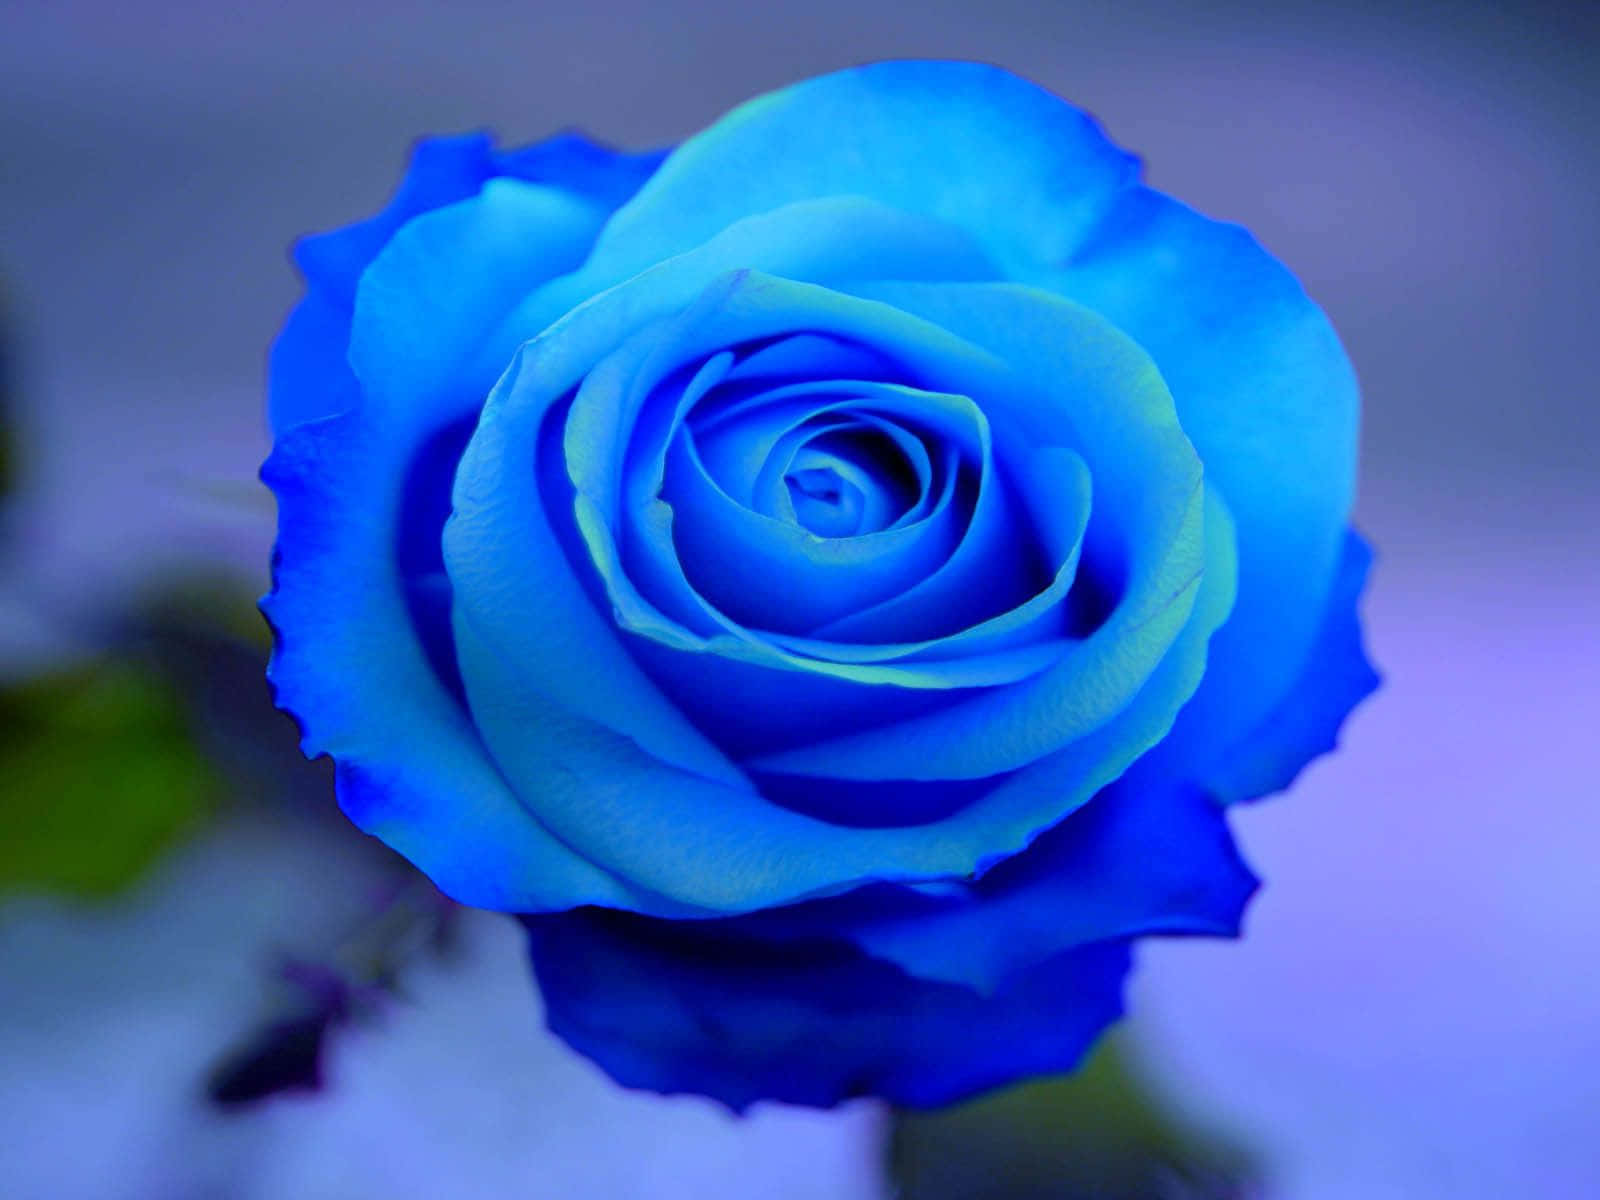 A Stunning Blue Petaled Rose Surrounded By A Soft Black Background.